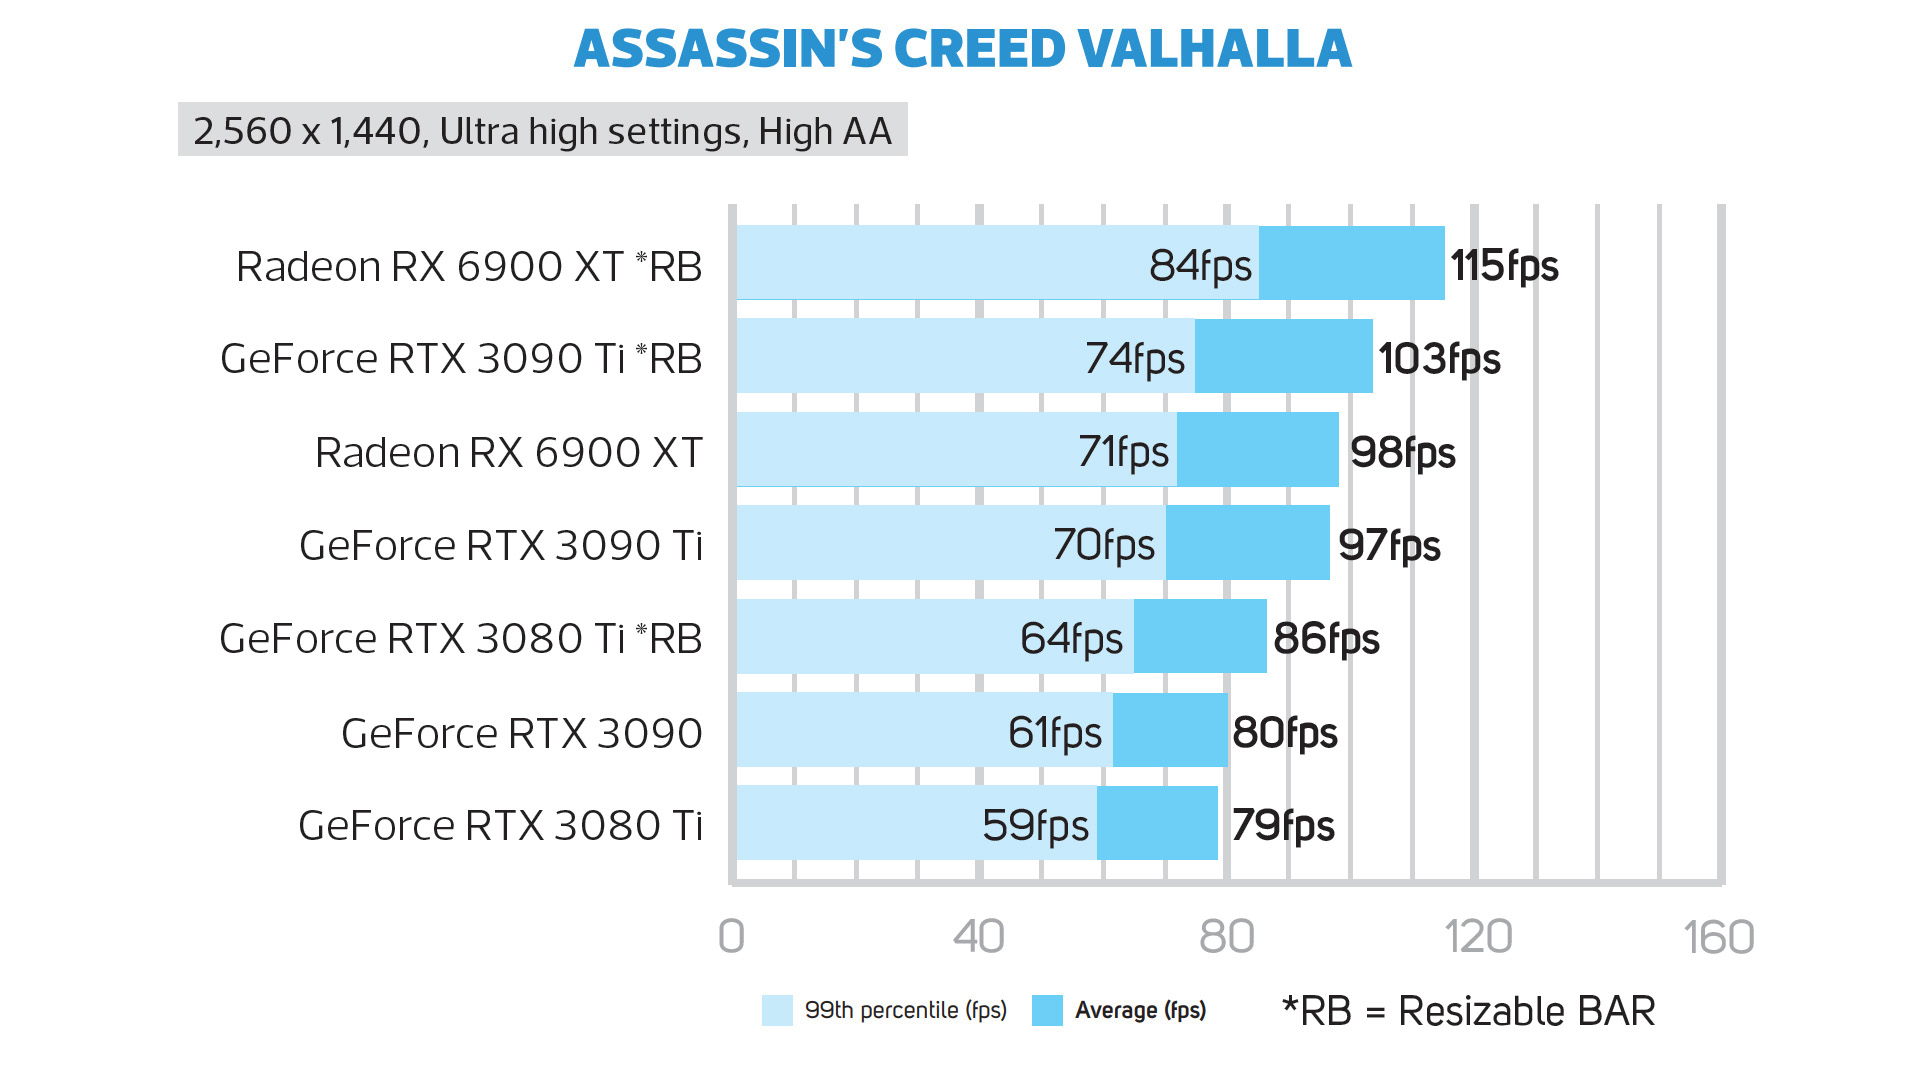 GeForce RTX 3090 Ti Assassin's Creed Valhalla 1440p frame rate